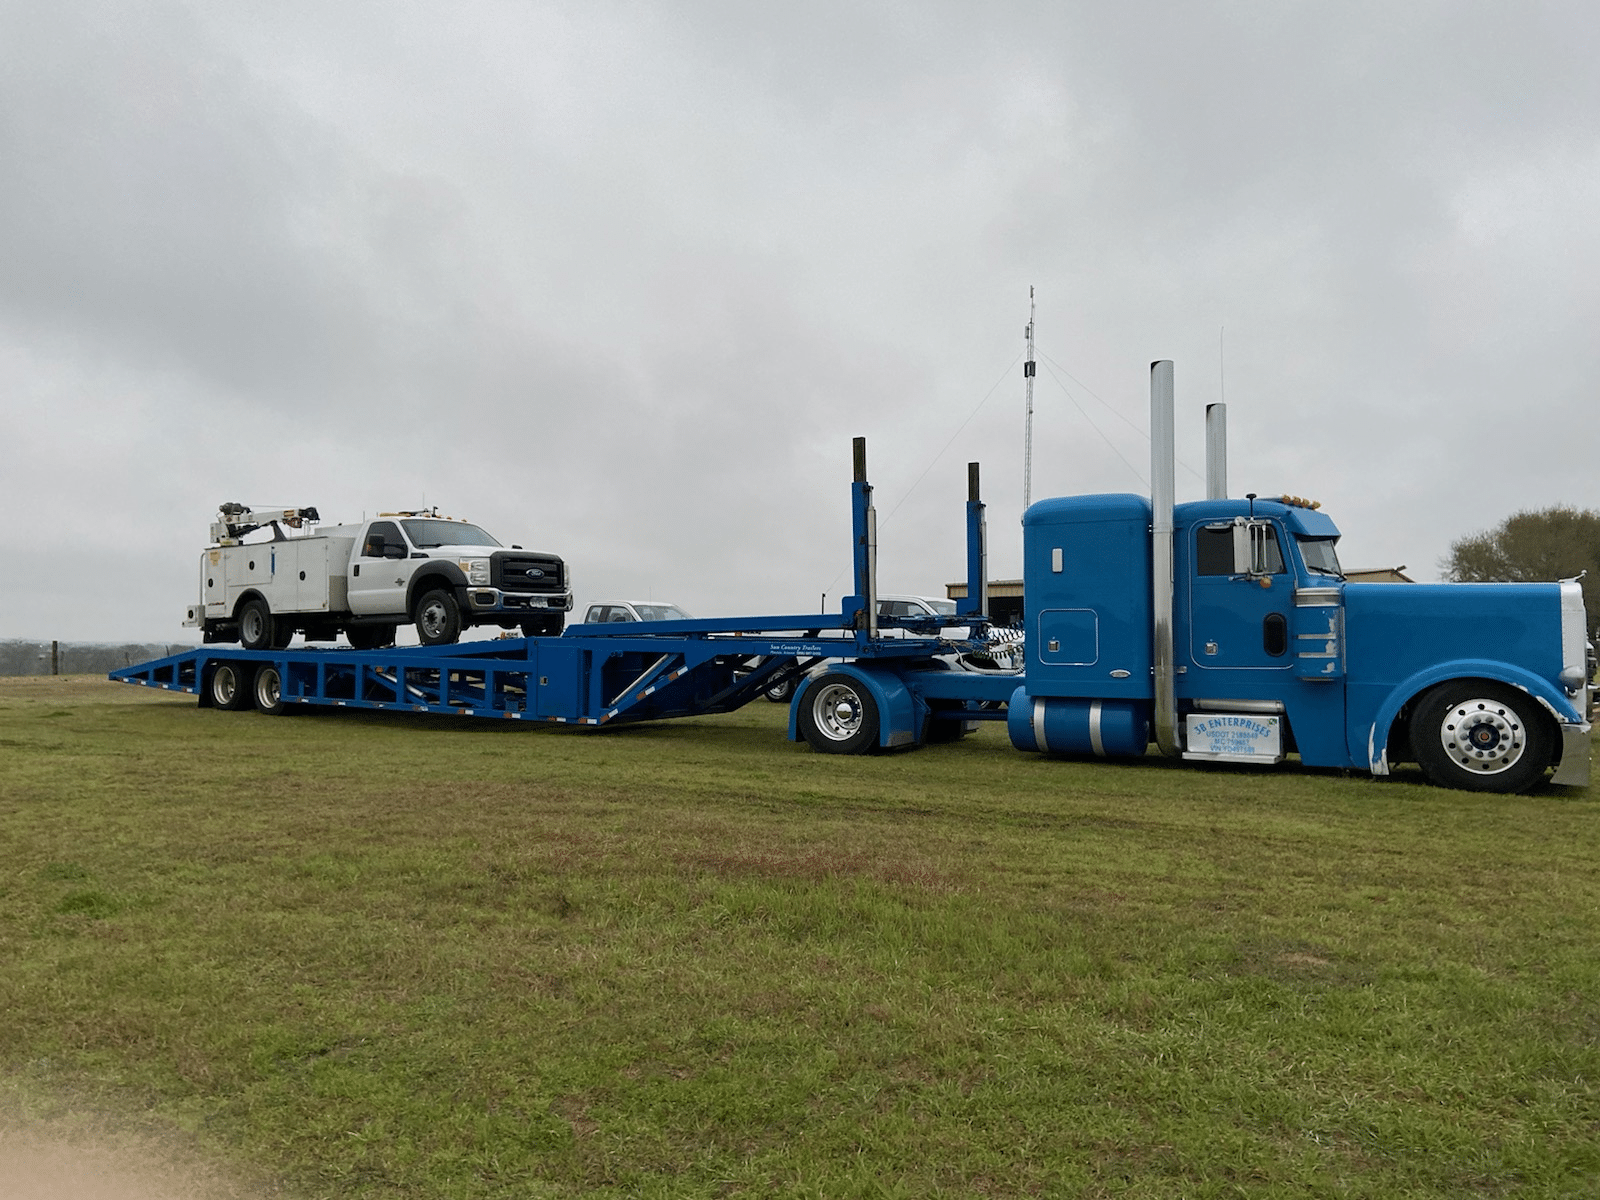 2014 Ford F-550 Truck transported on an auto carrier trailer